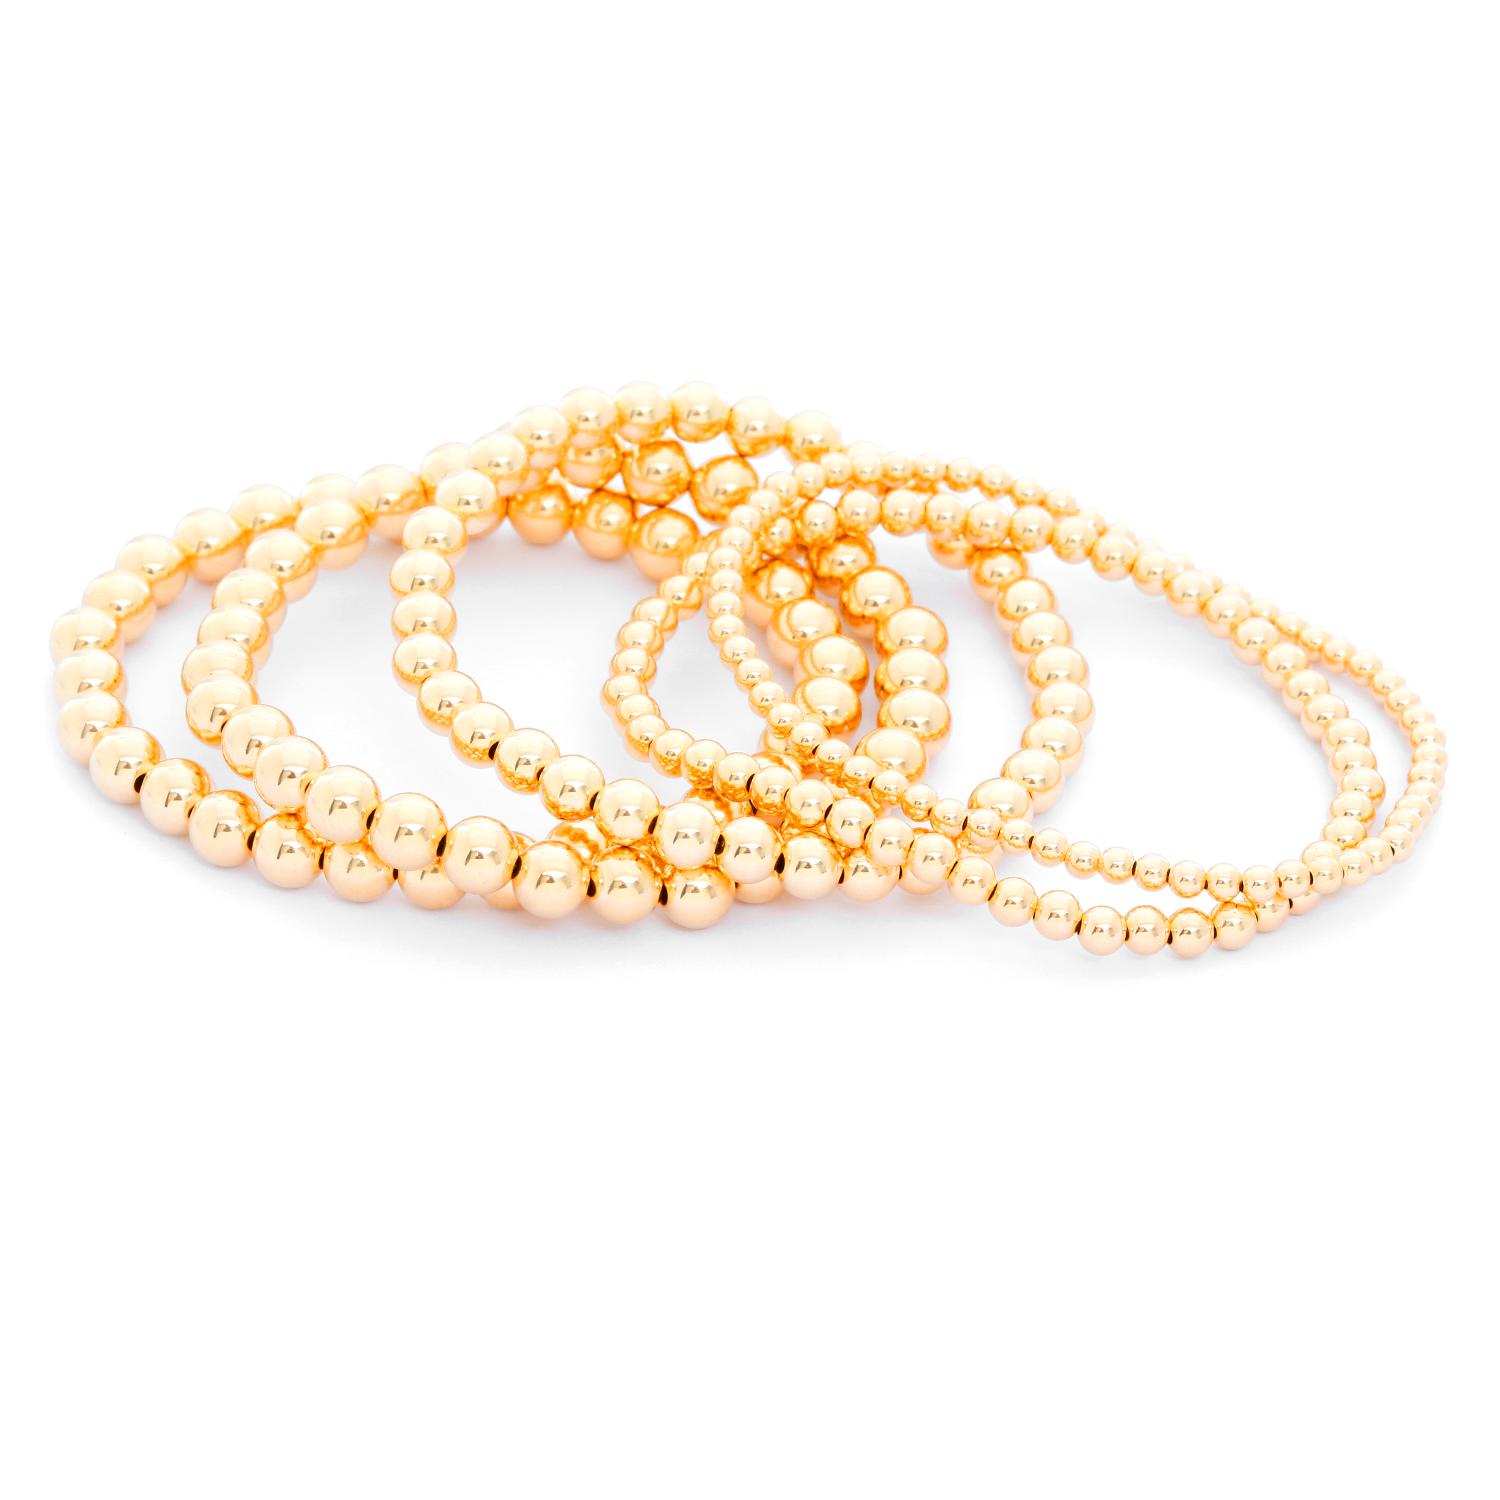 Gold Bead Ball Stretch Bracelets - Five stack-able bead bracelet. Pictured  one 3 mm, one 4 mm, one 5mm, two 6mm.  New with DeMesy pouch. Wearable all day and in the shower and they will still hold their luster and stretch.